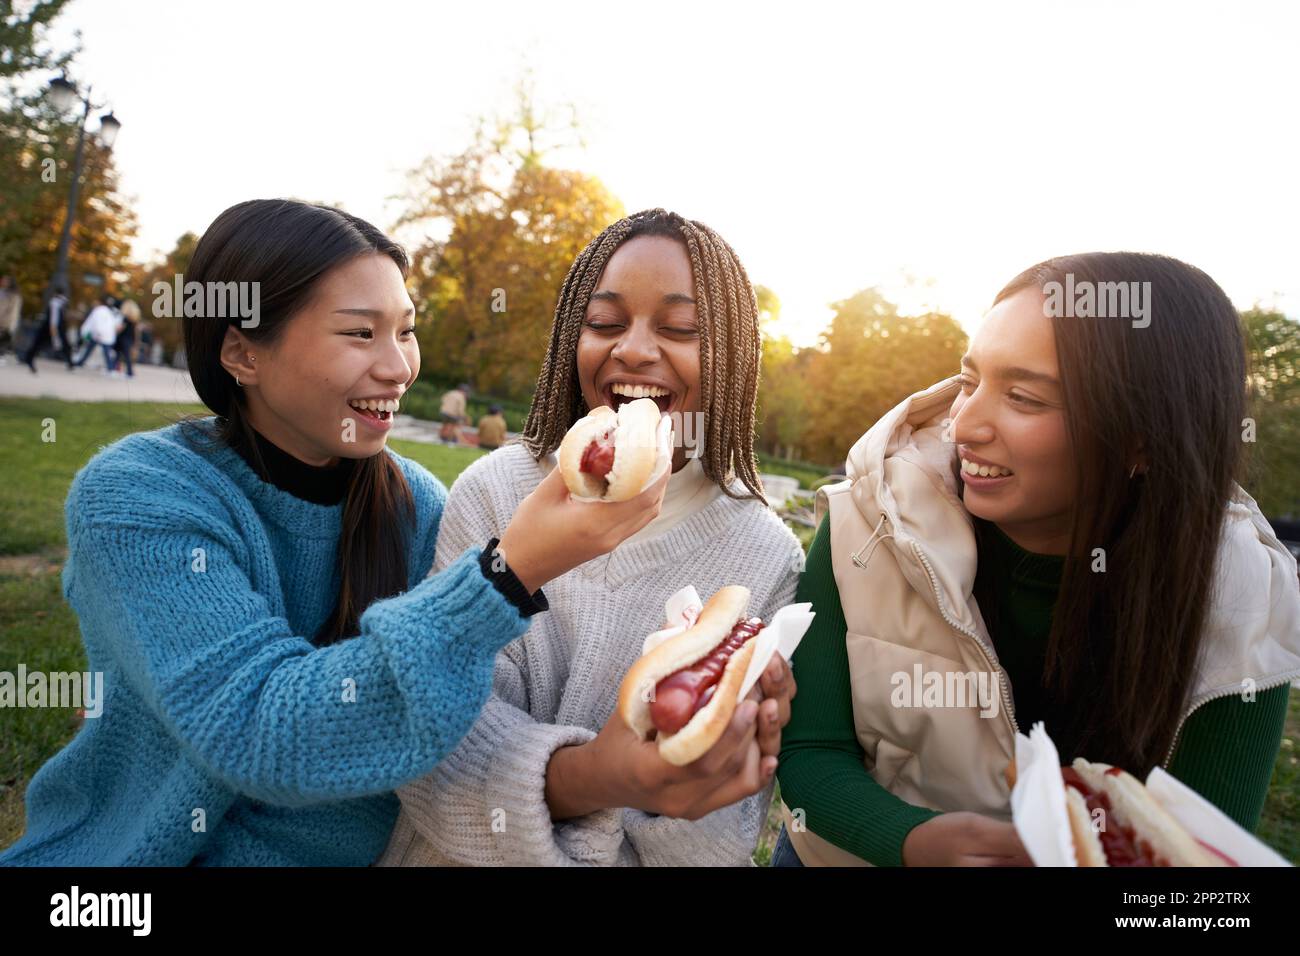 Group of happy smiling girls eating takeaway street food sitting on a bench in a nice city park. Stock Photo